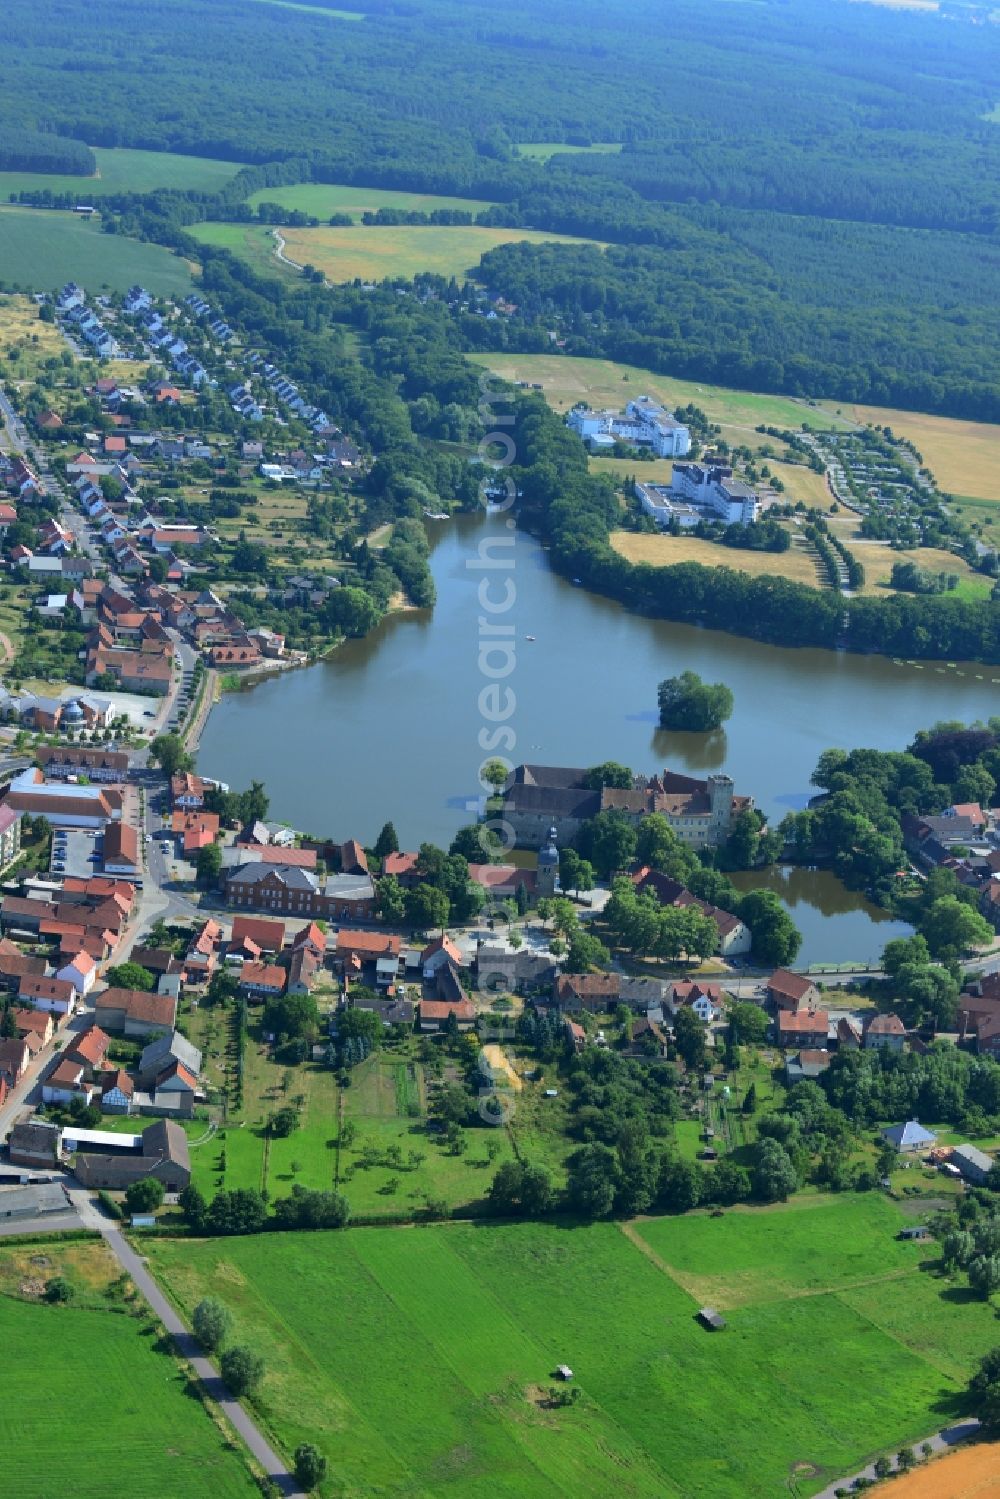 Flechtingen from the bird's eye view: Cityscape with castle pond in the center of Flechtingen in Saxony-Anhalt